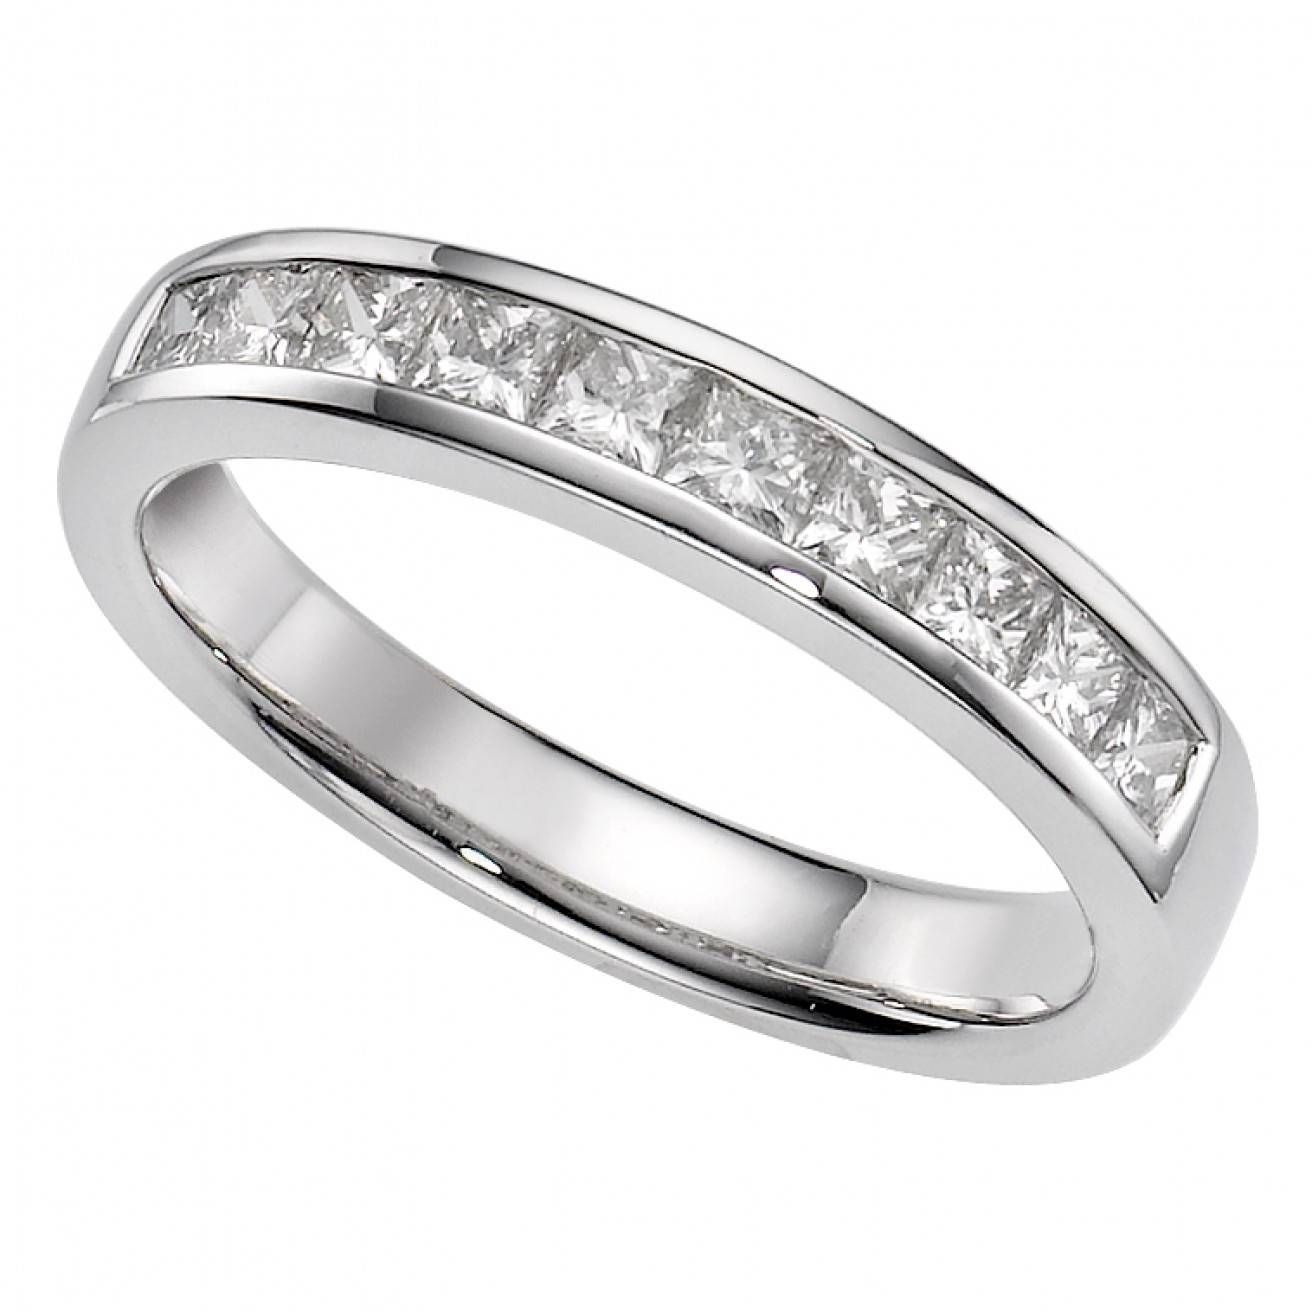 Platinum Eternity Rings For 2017 Platinum Eternity Wedding Bands (View 13 of 15)